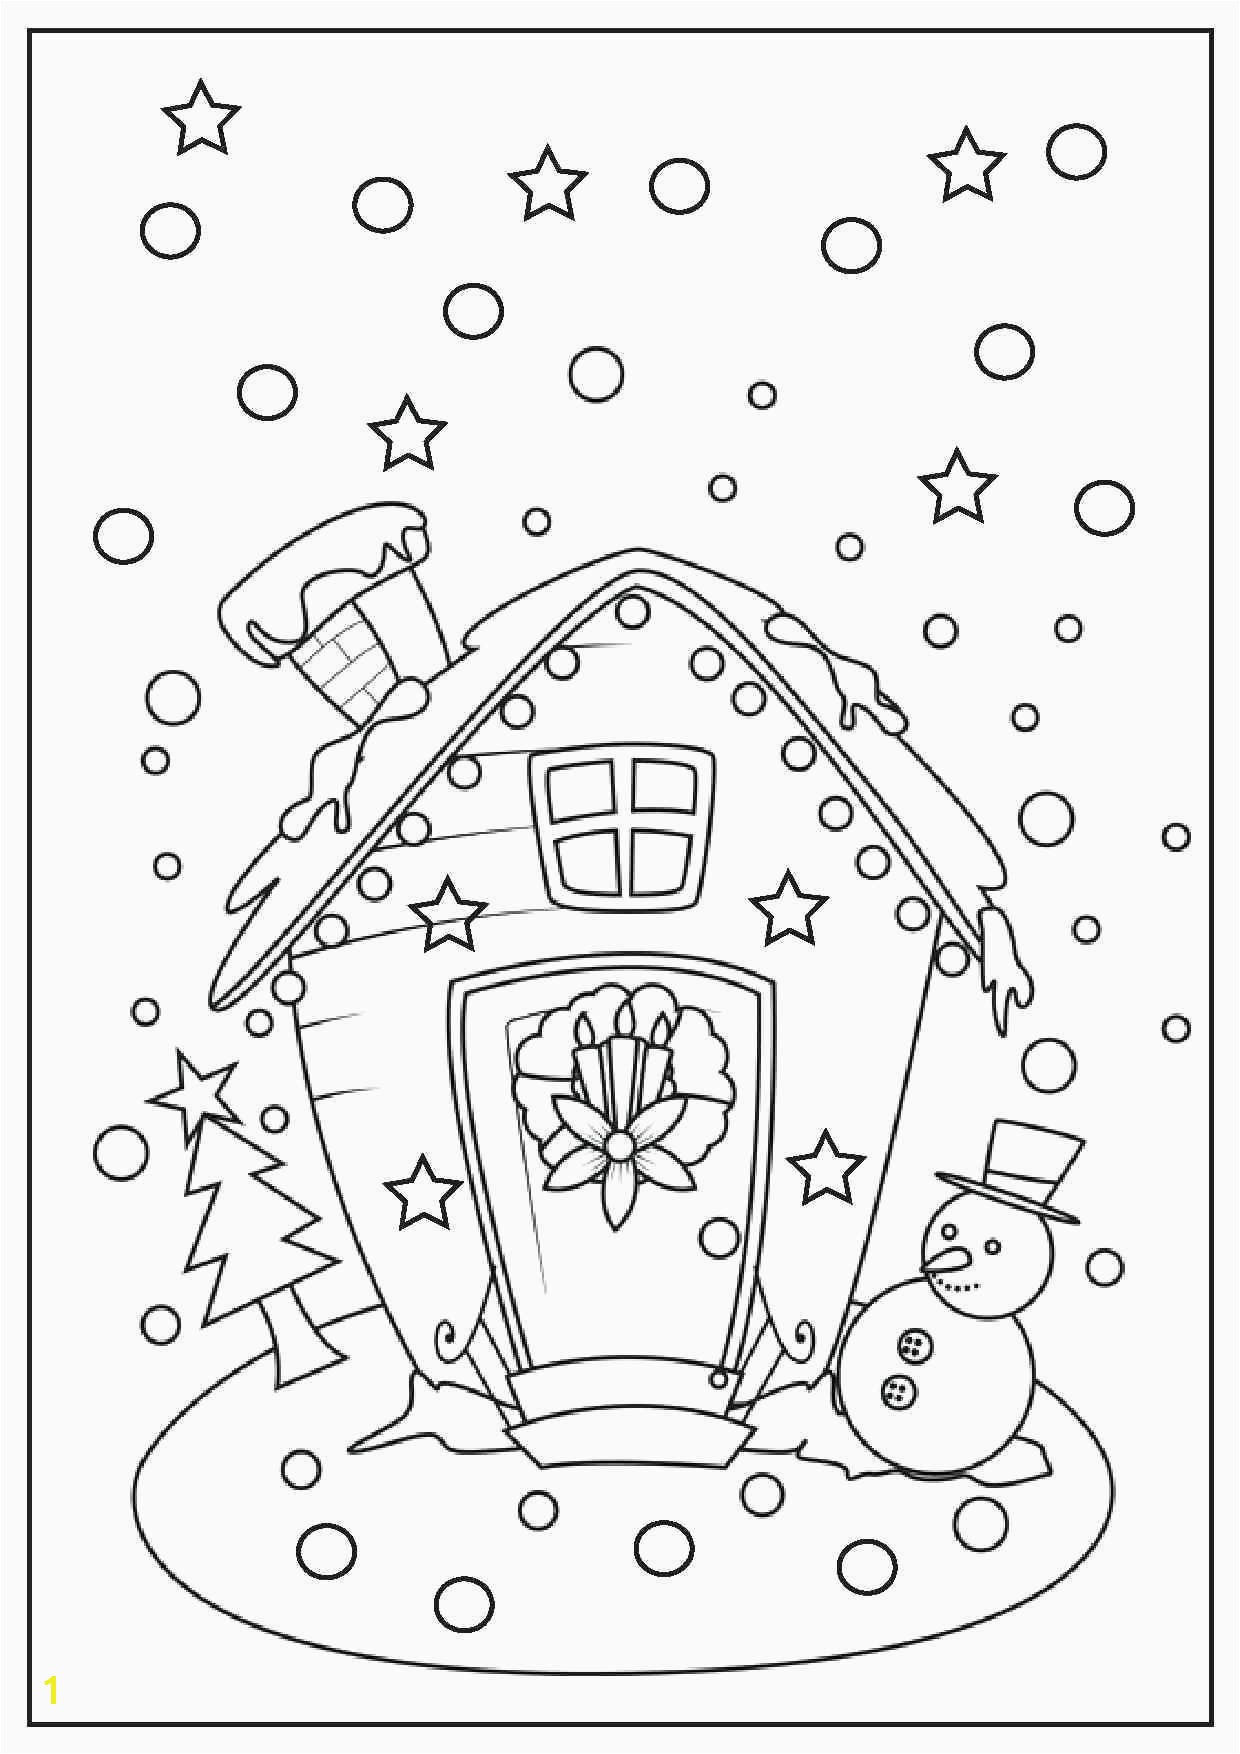 Blank Christmas ornament Coloring Page Cool Printable Coloring Pages Fresh Cool Od Dog Coloring Pages Free